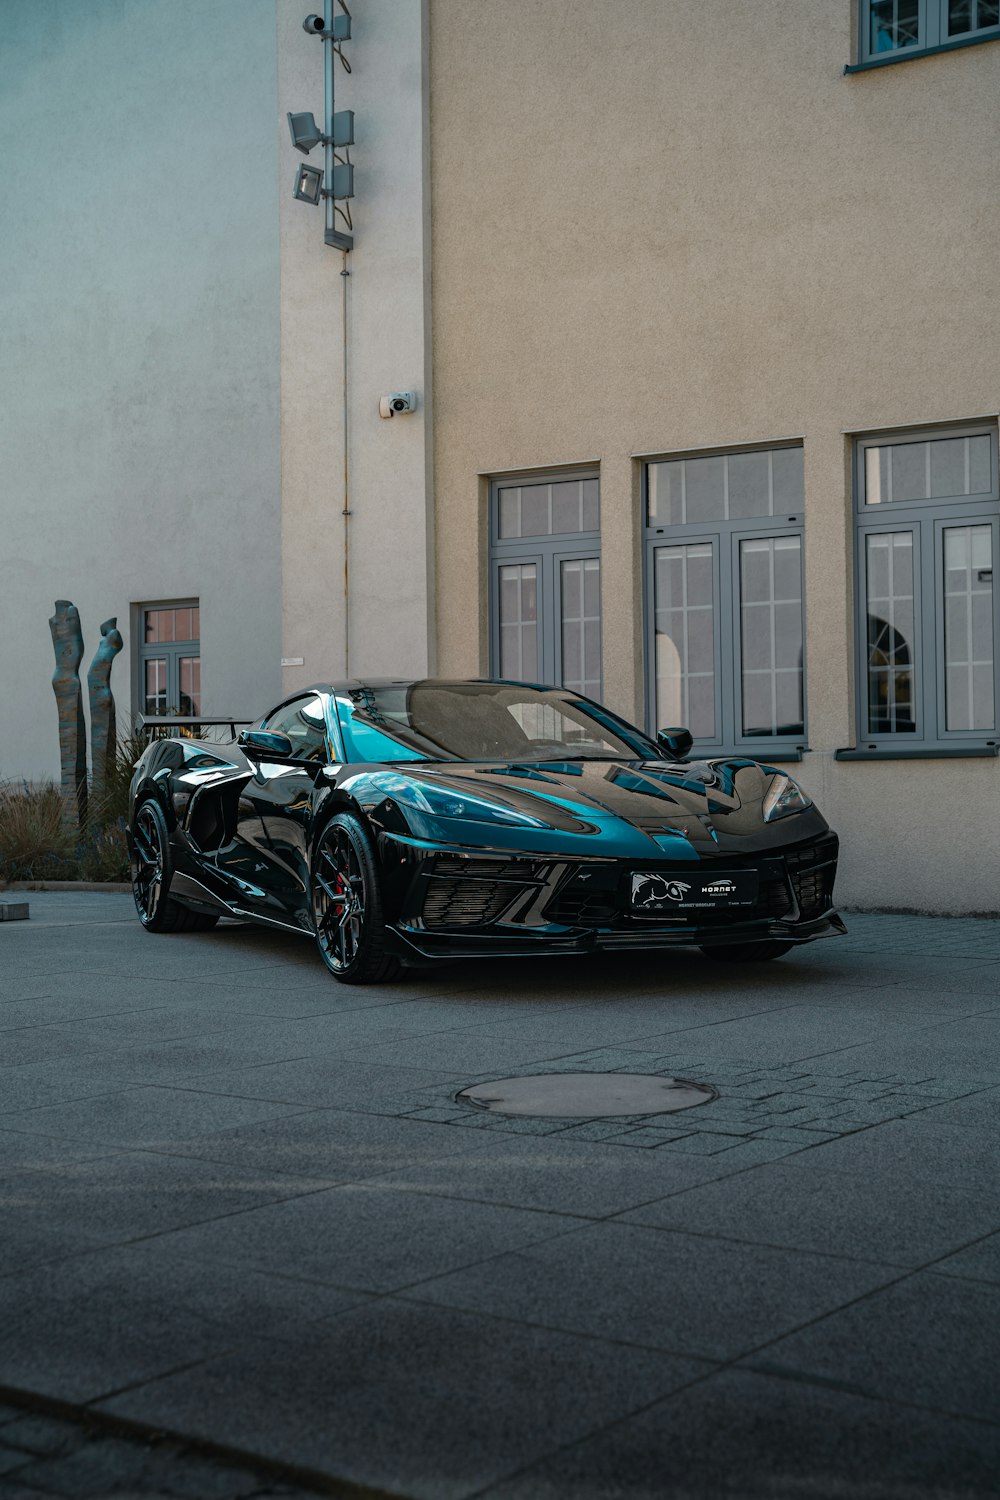 a black and blue sports car parked in front of a building